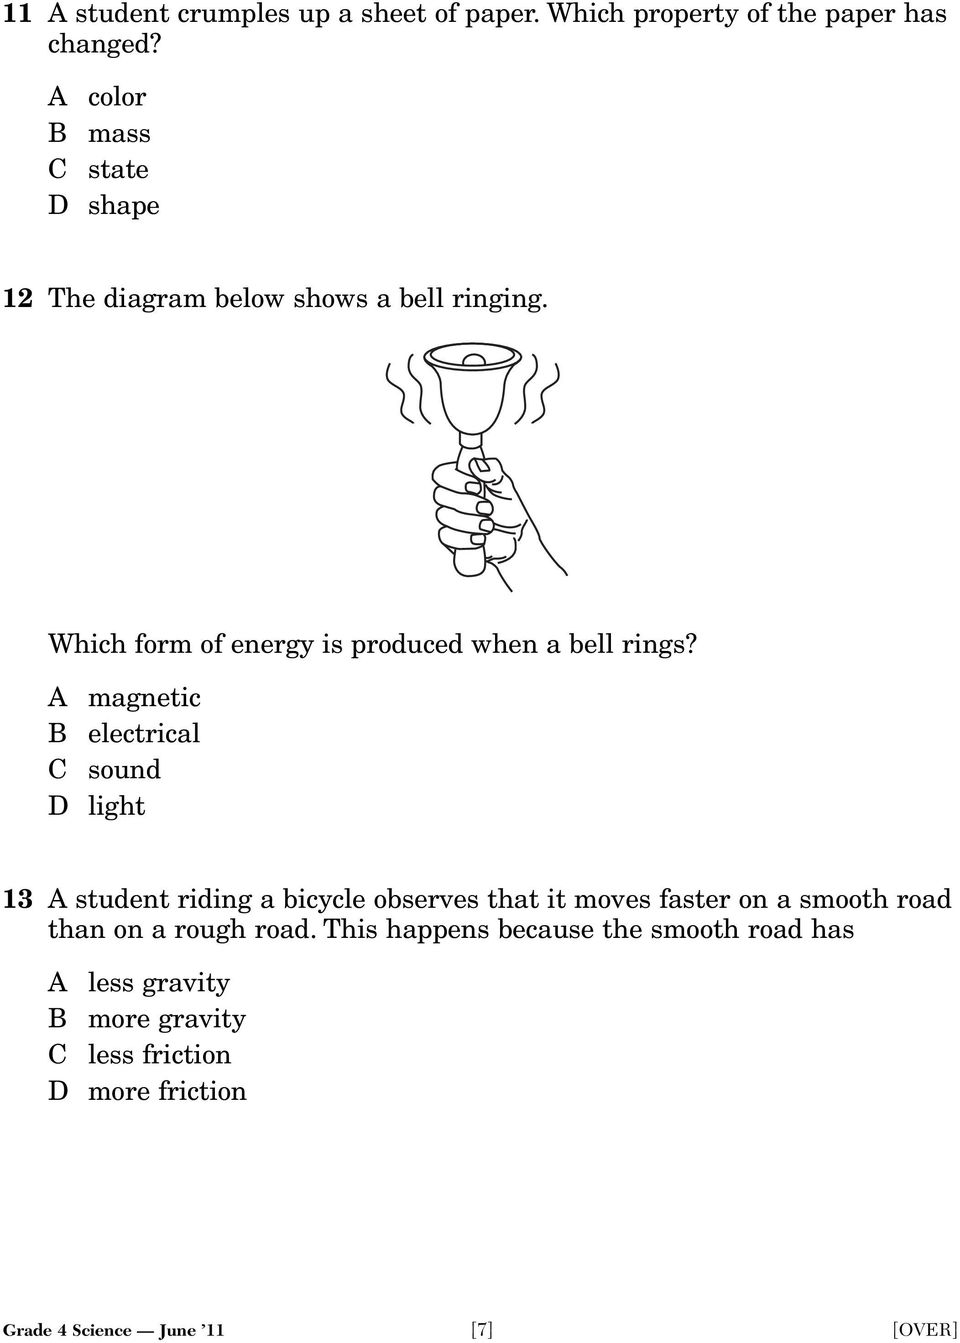 Which form of energy is produced when a bell rings?